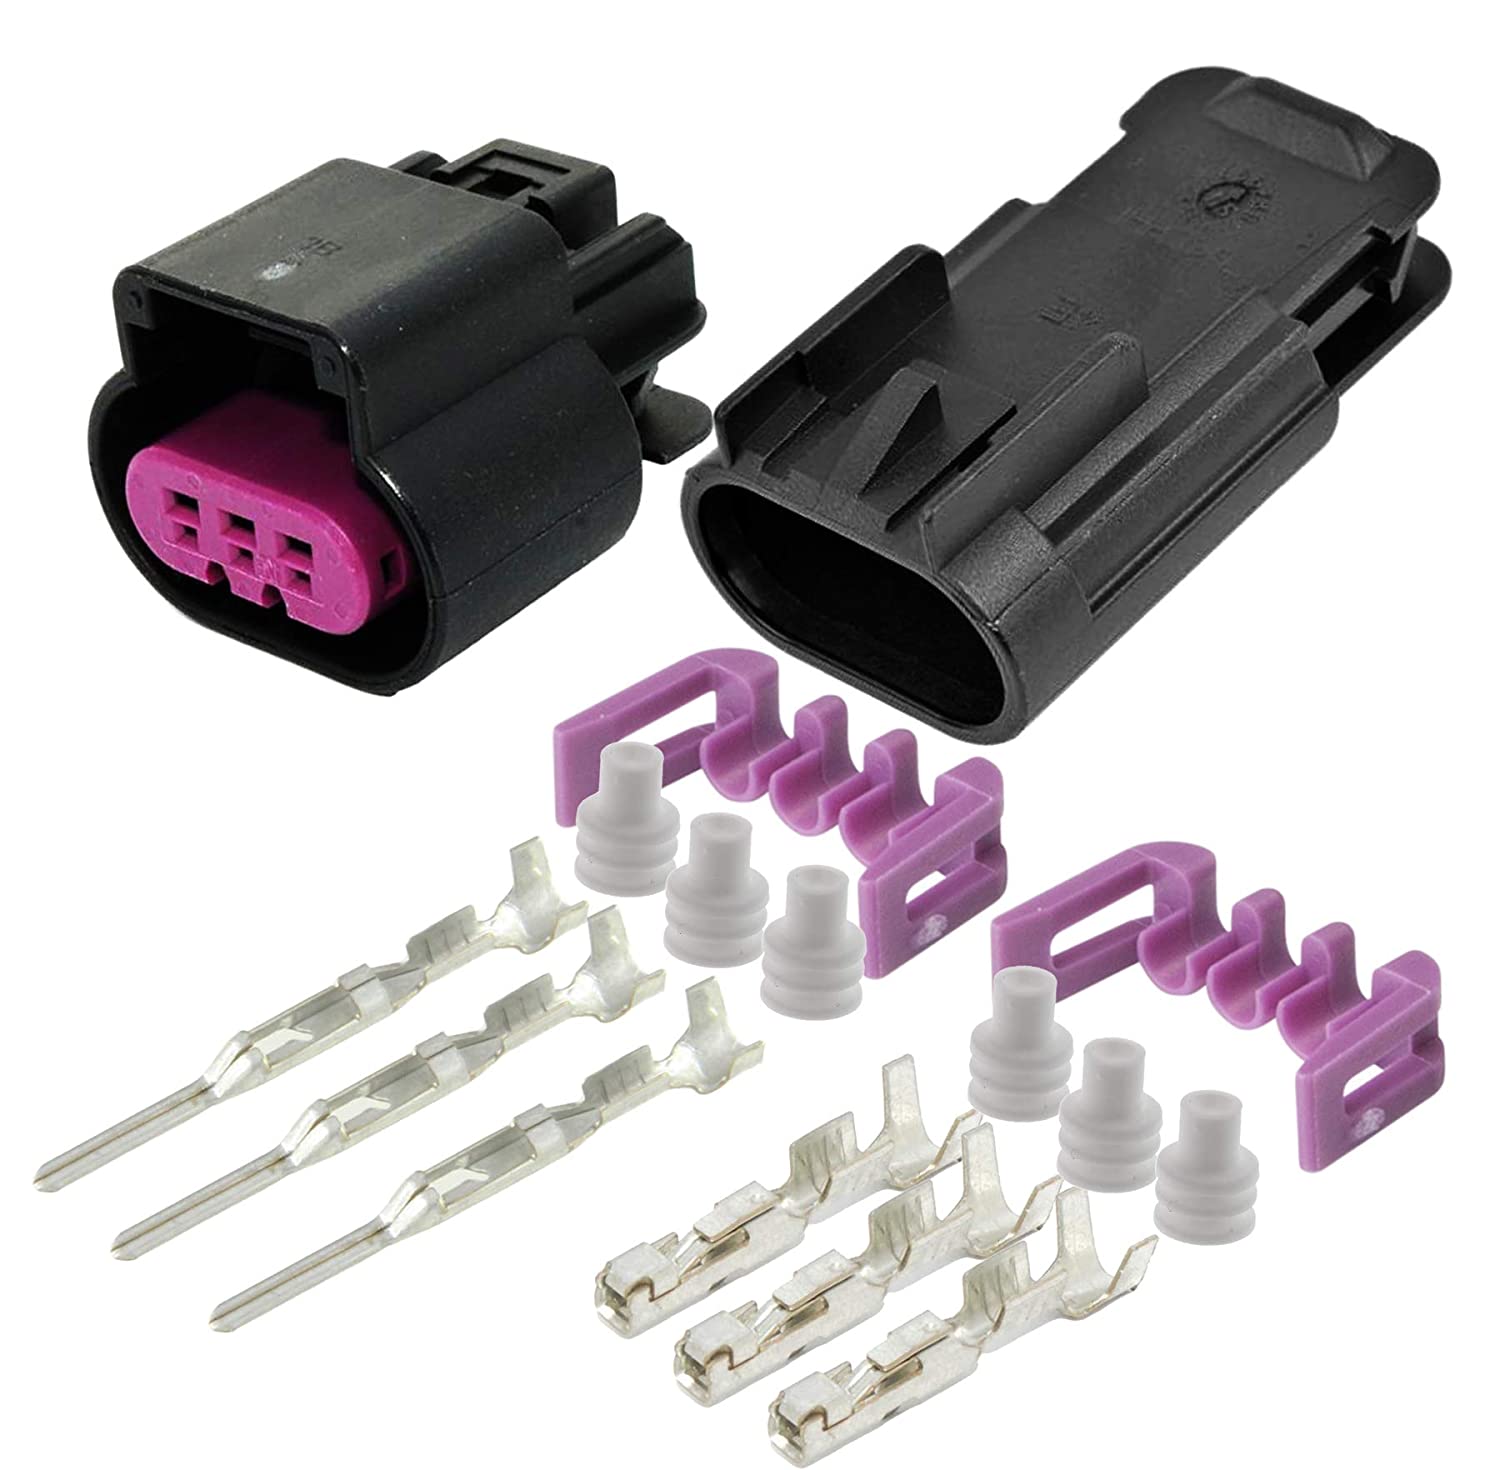 Aptiv Delphi 3-Pin GT 150 Series Sealed Connector Set with 20 22 GA, up to 15 Amps (3-Pins)